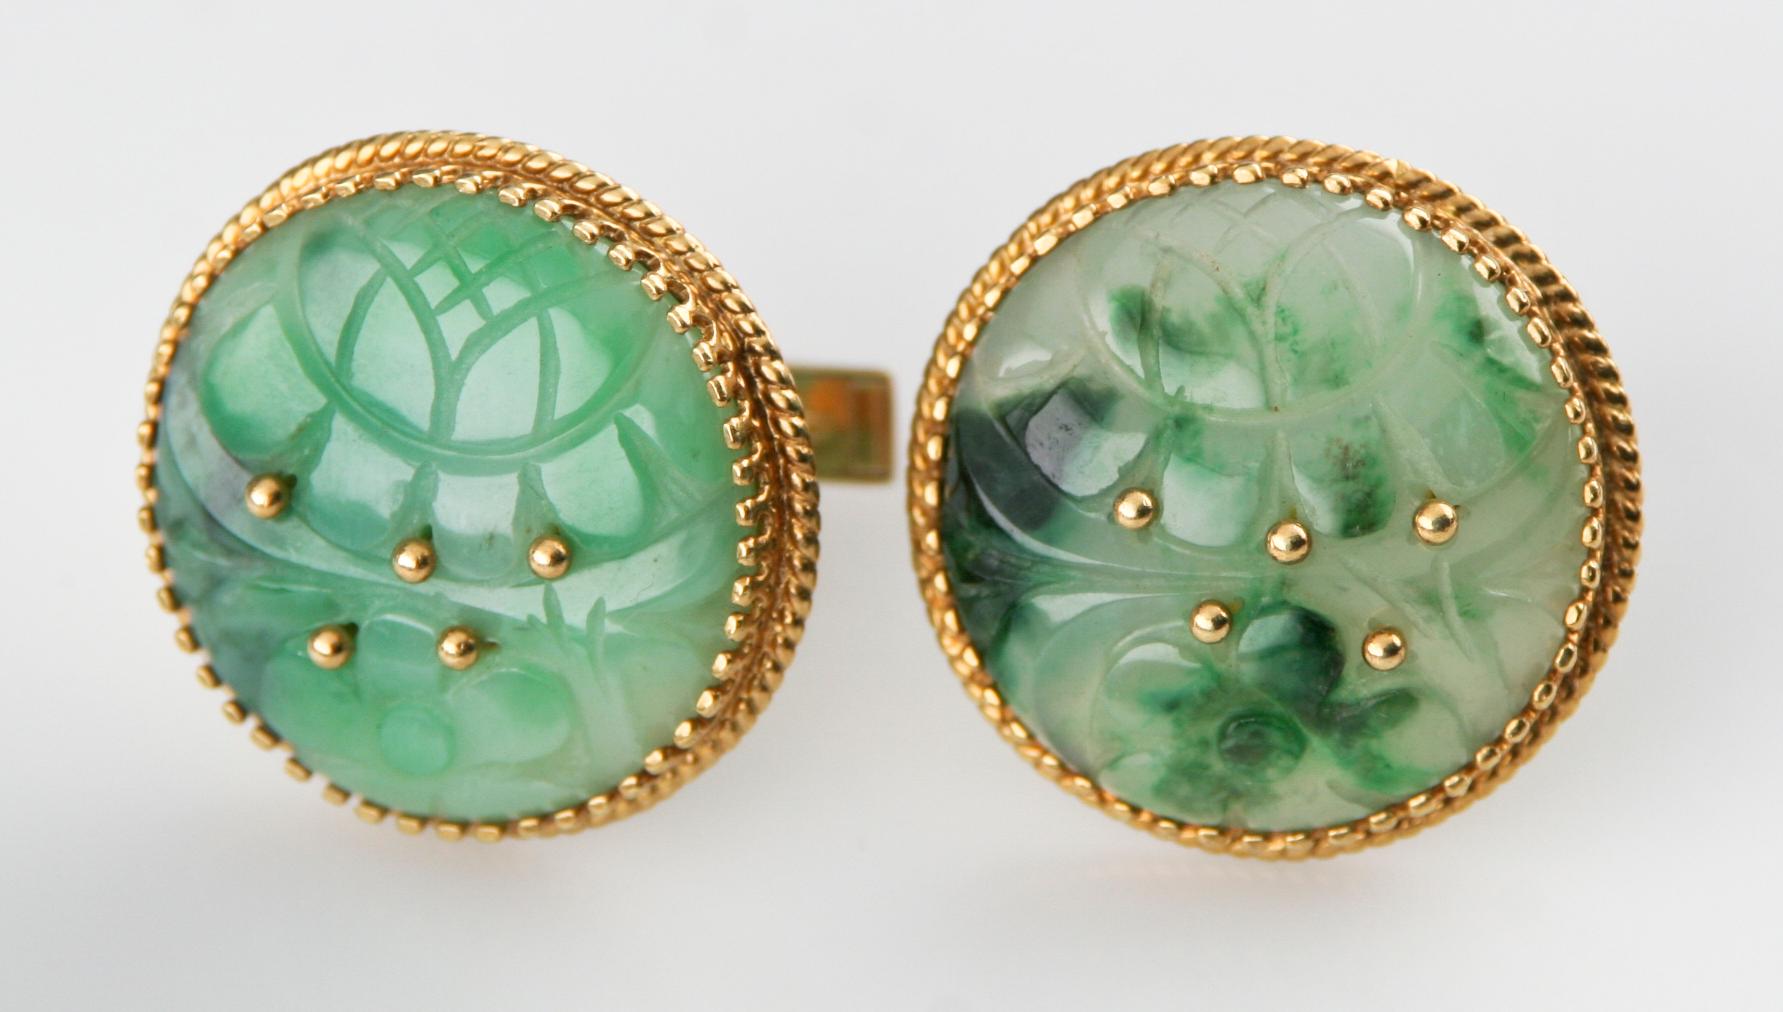 Gorgeous 18k Yellow Gold Cufflinks
Clasps are 14k Yellow Gold
Feature Gorgeous Carved Imperial Jade Stones with Gold Bead Accents
Diameter of Jade = approximately 28 mm
Total Mass = 29.9 grams